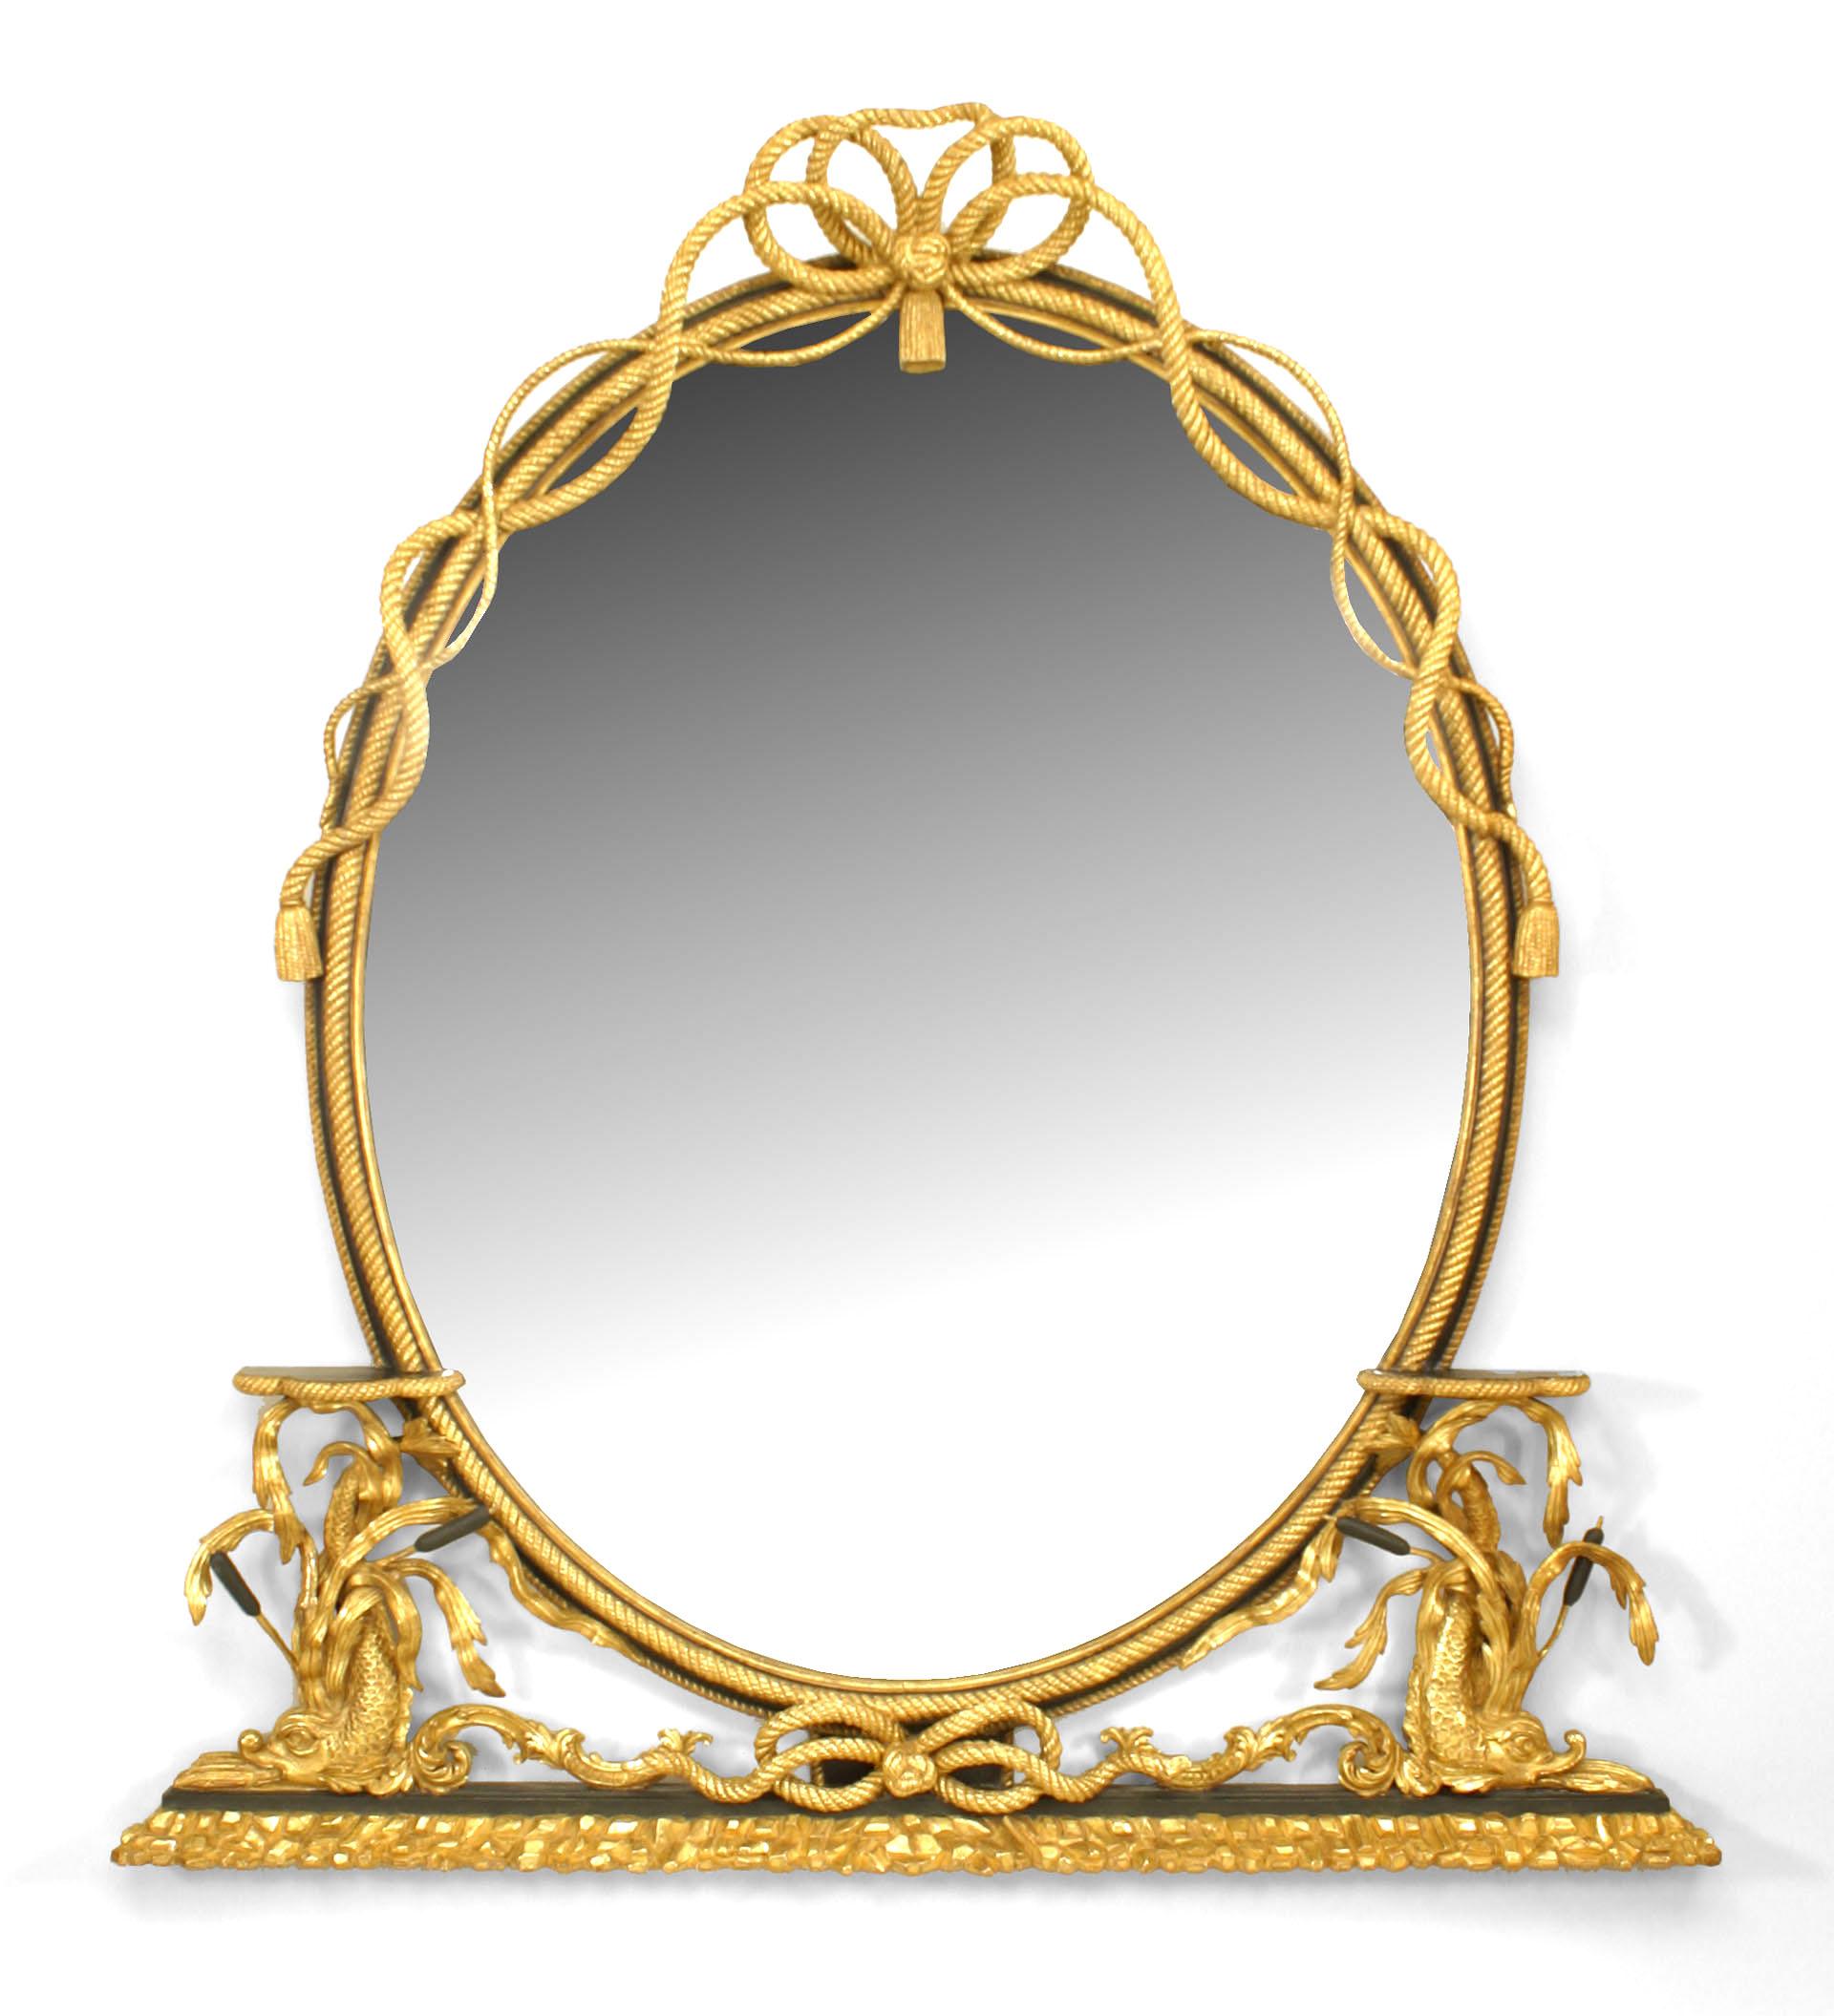 English Georgian (19th Century) gilt and ebonized trimmed oval wall mirror with a carved gilt rope border, bow knot top, and dolphin support side shelves.
